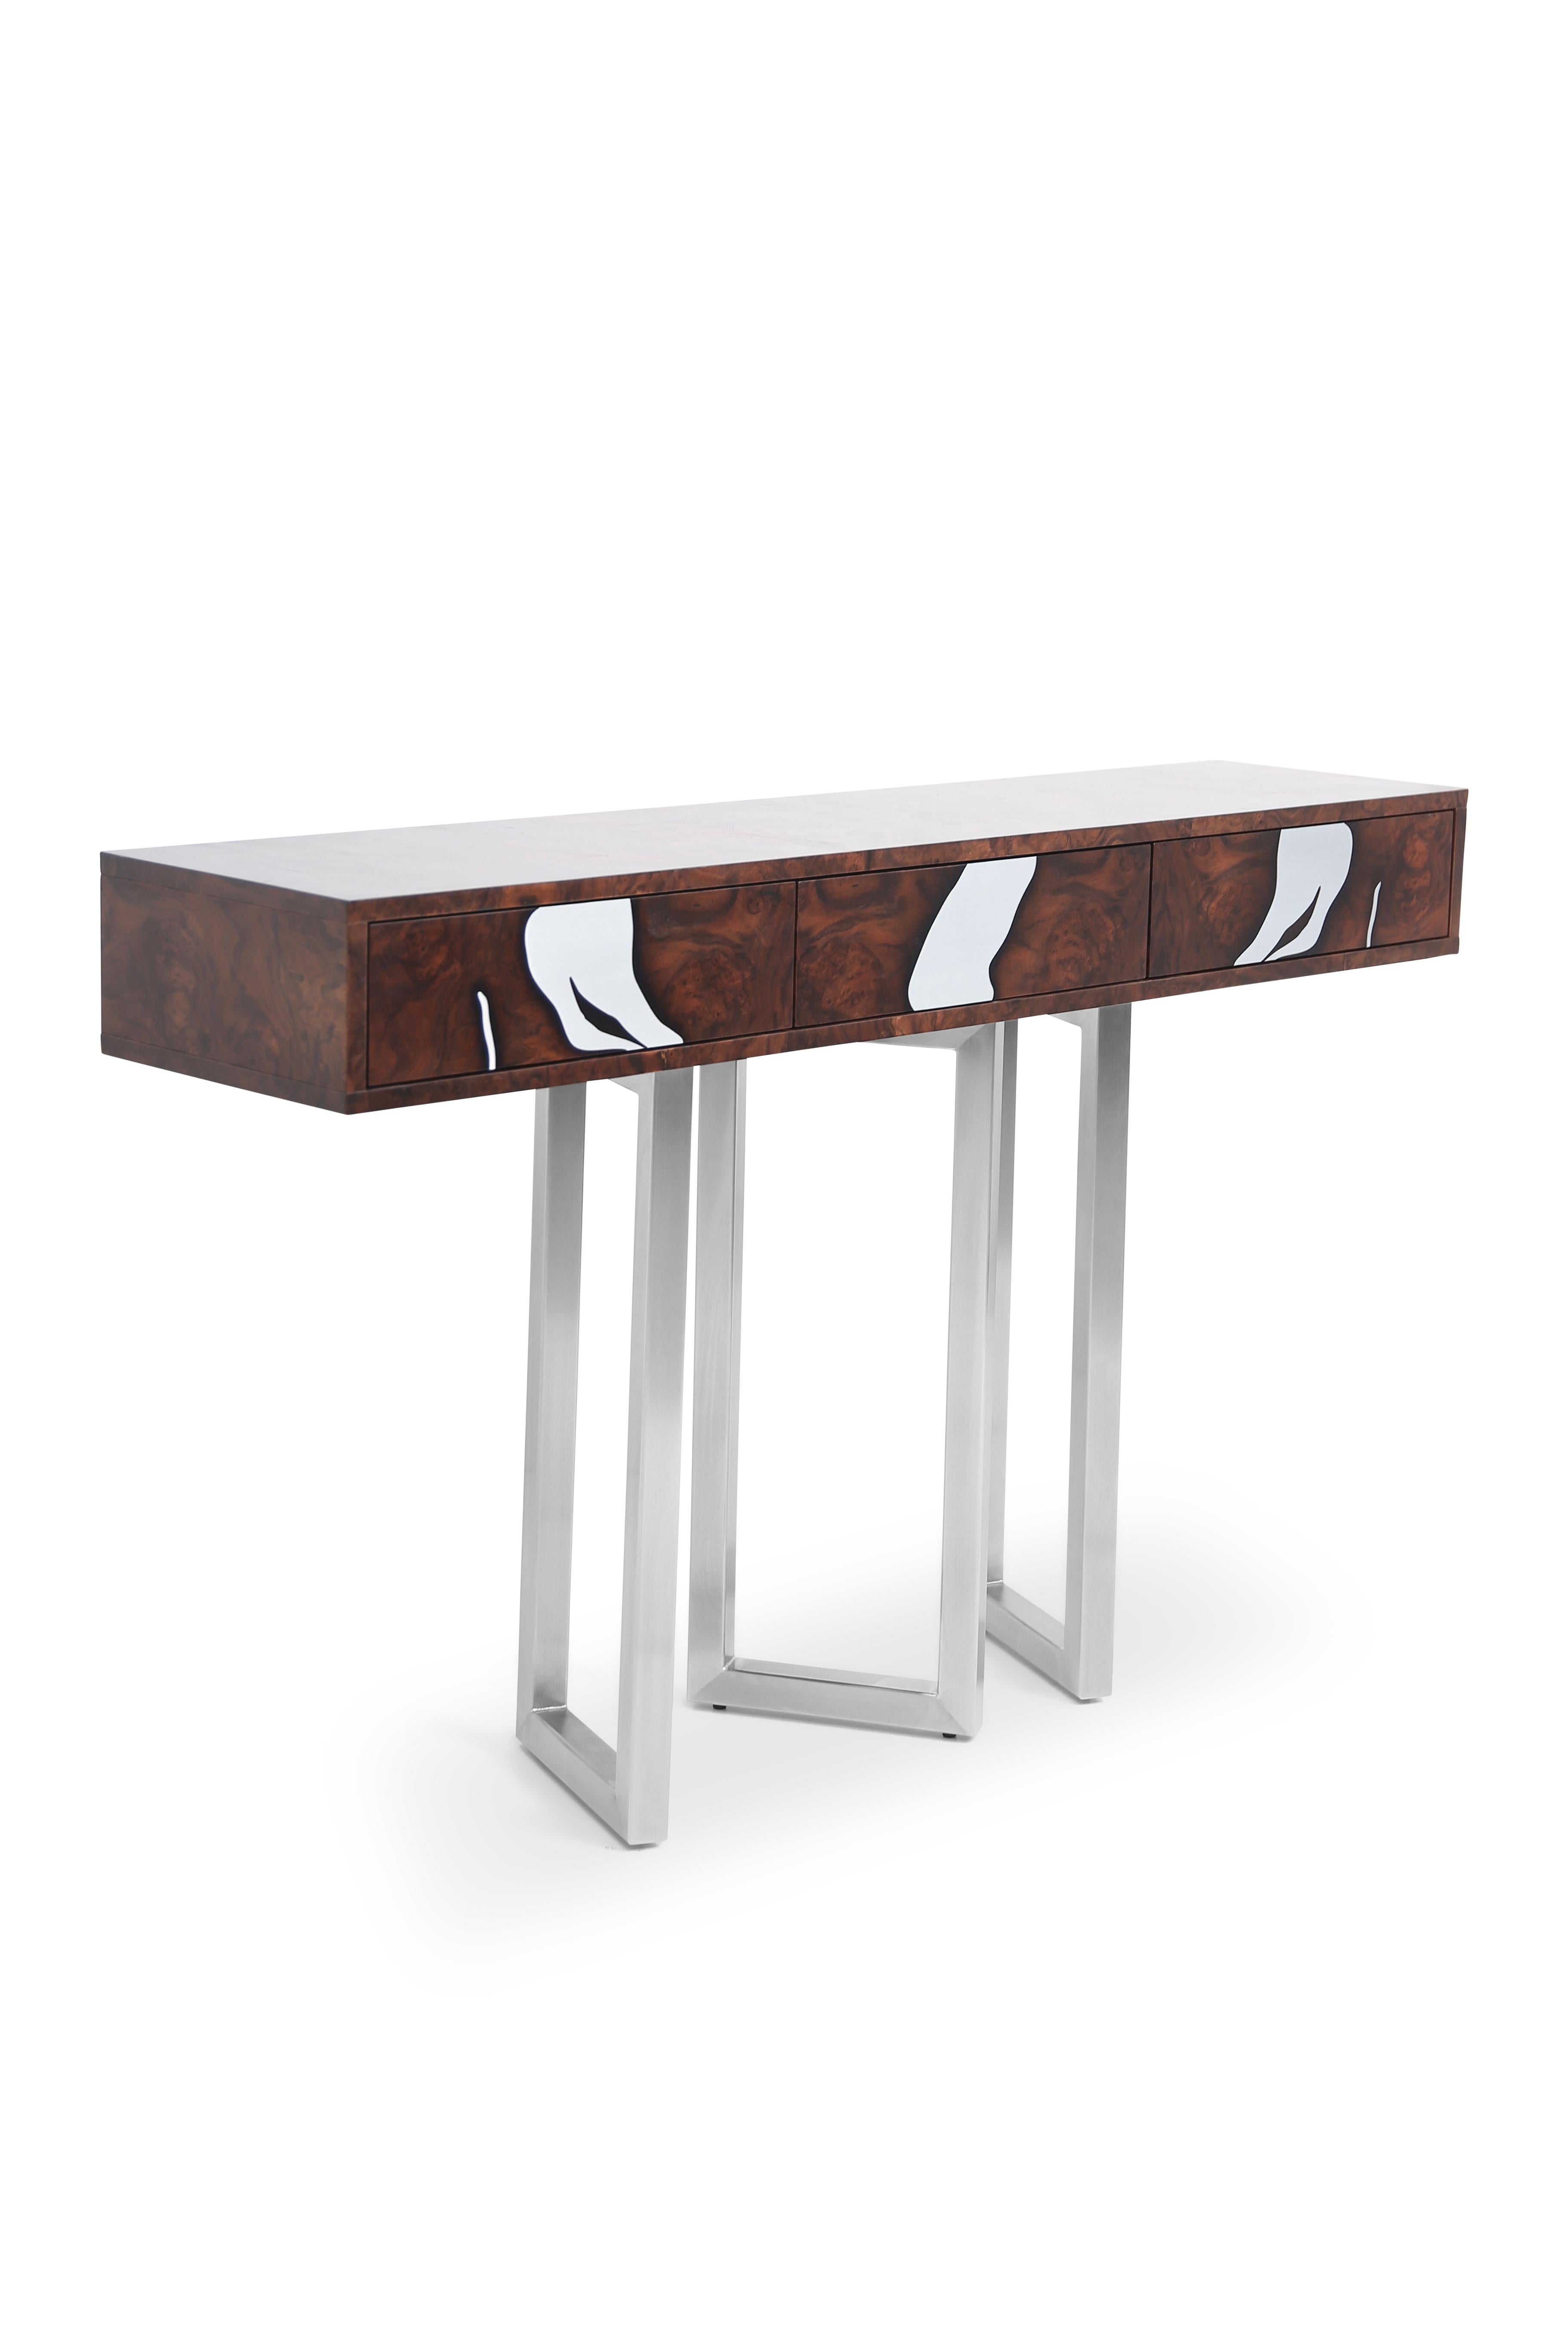 New console table from Oxara collection! Title is after Icelandic river!

Boost the look of your entryway, hallway, living room or office space with this modern style, accent console table. Made with high-quality walnut root veneers and polished